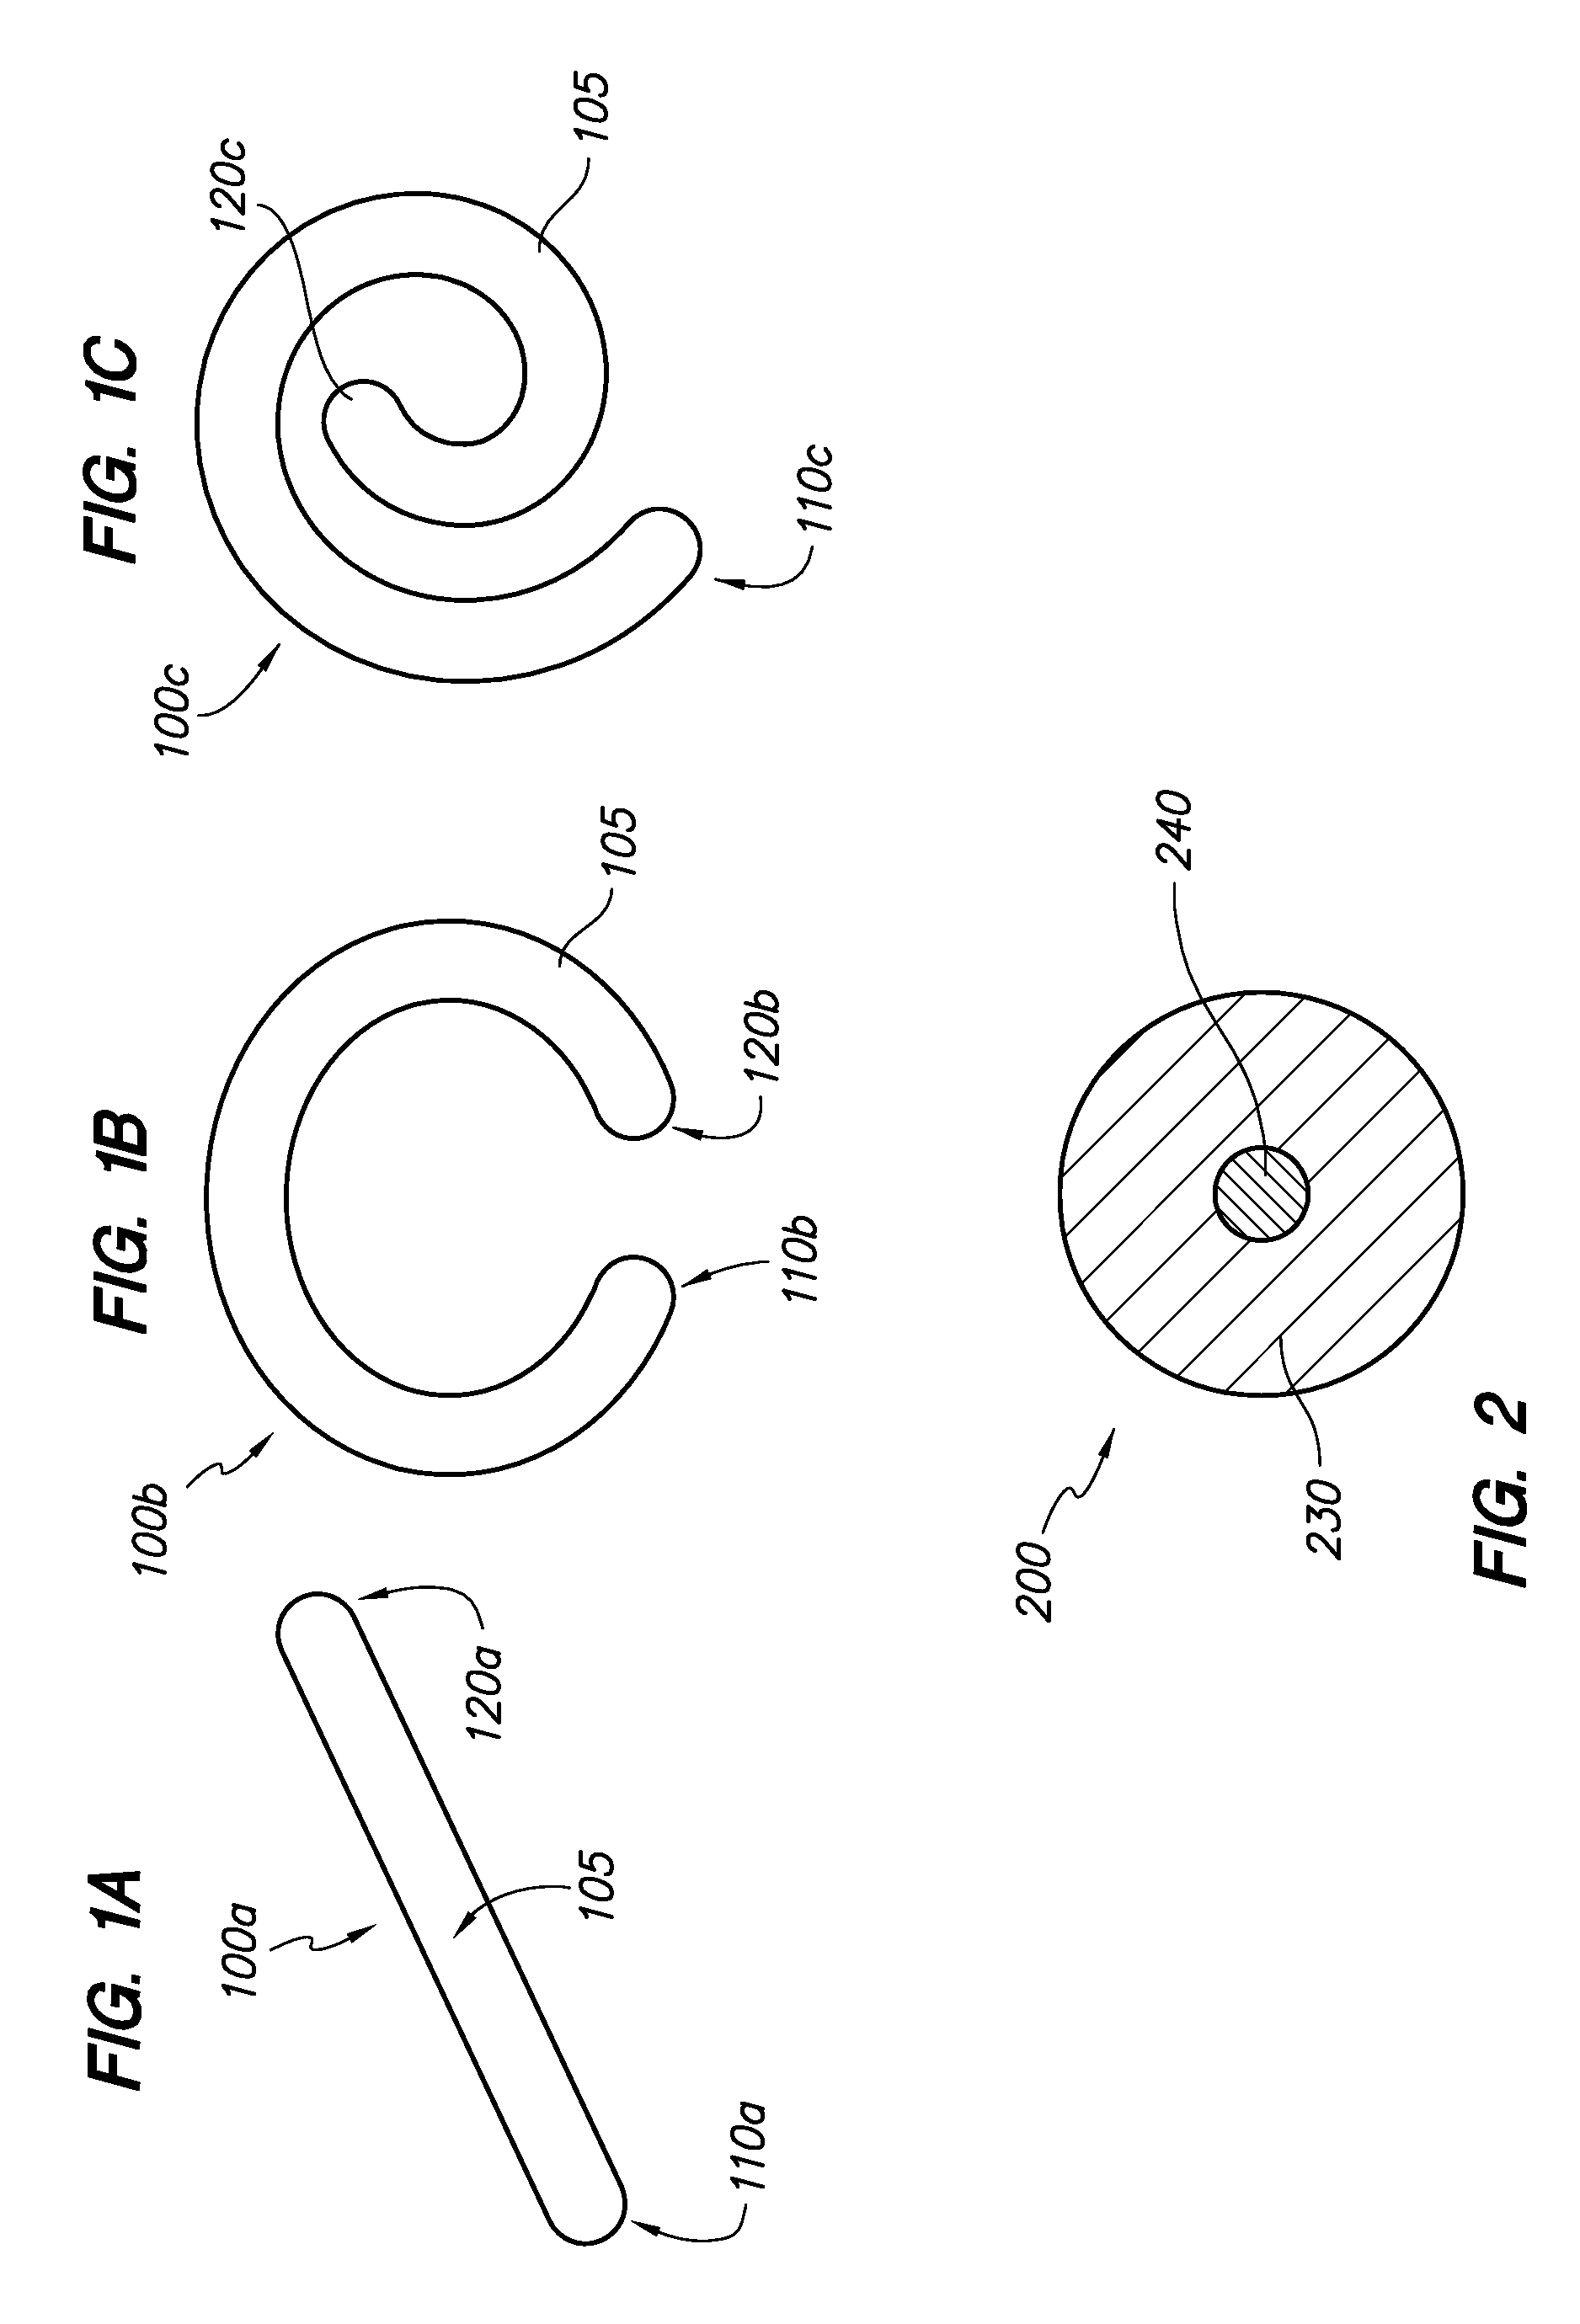 Suture-based orthopedic joint devices